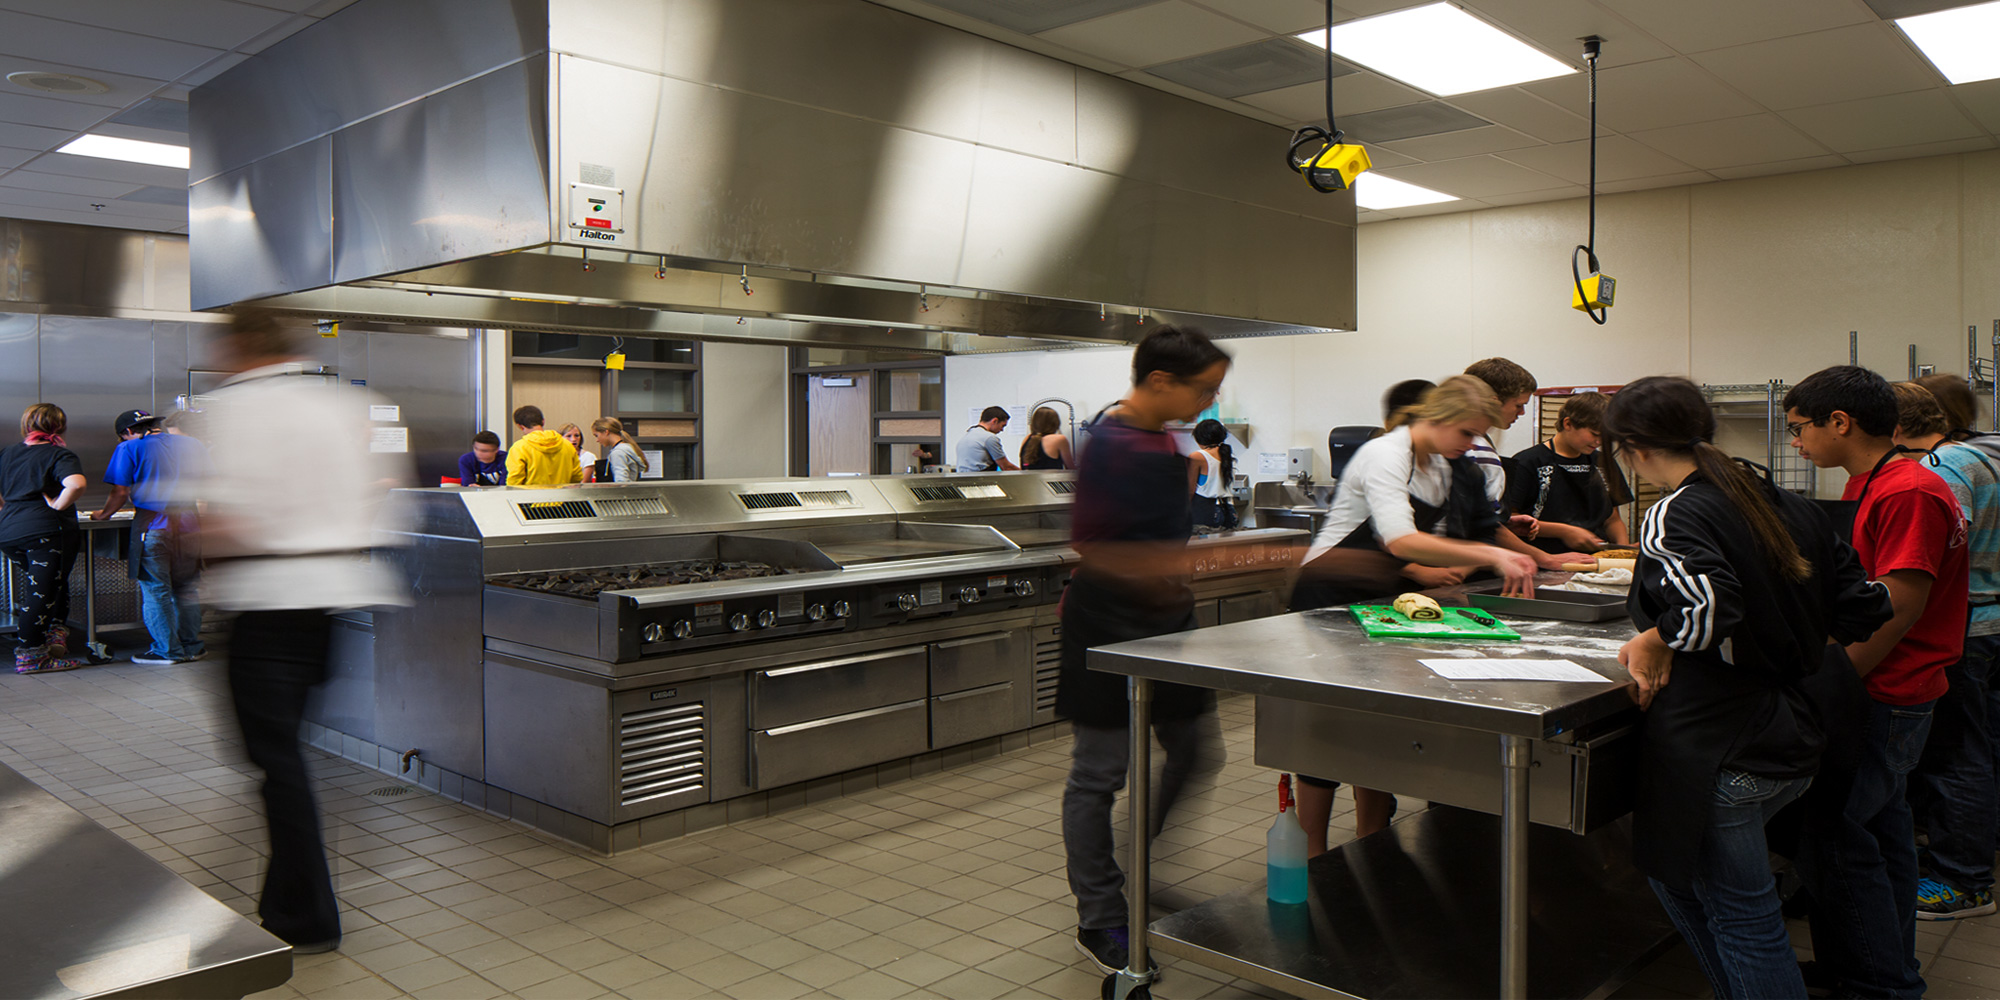 Students working inside kitchen at Ridgeview High School